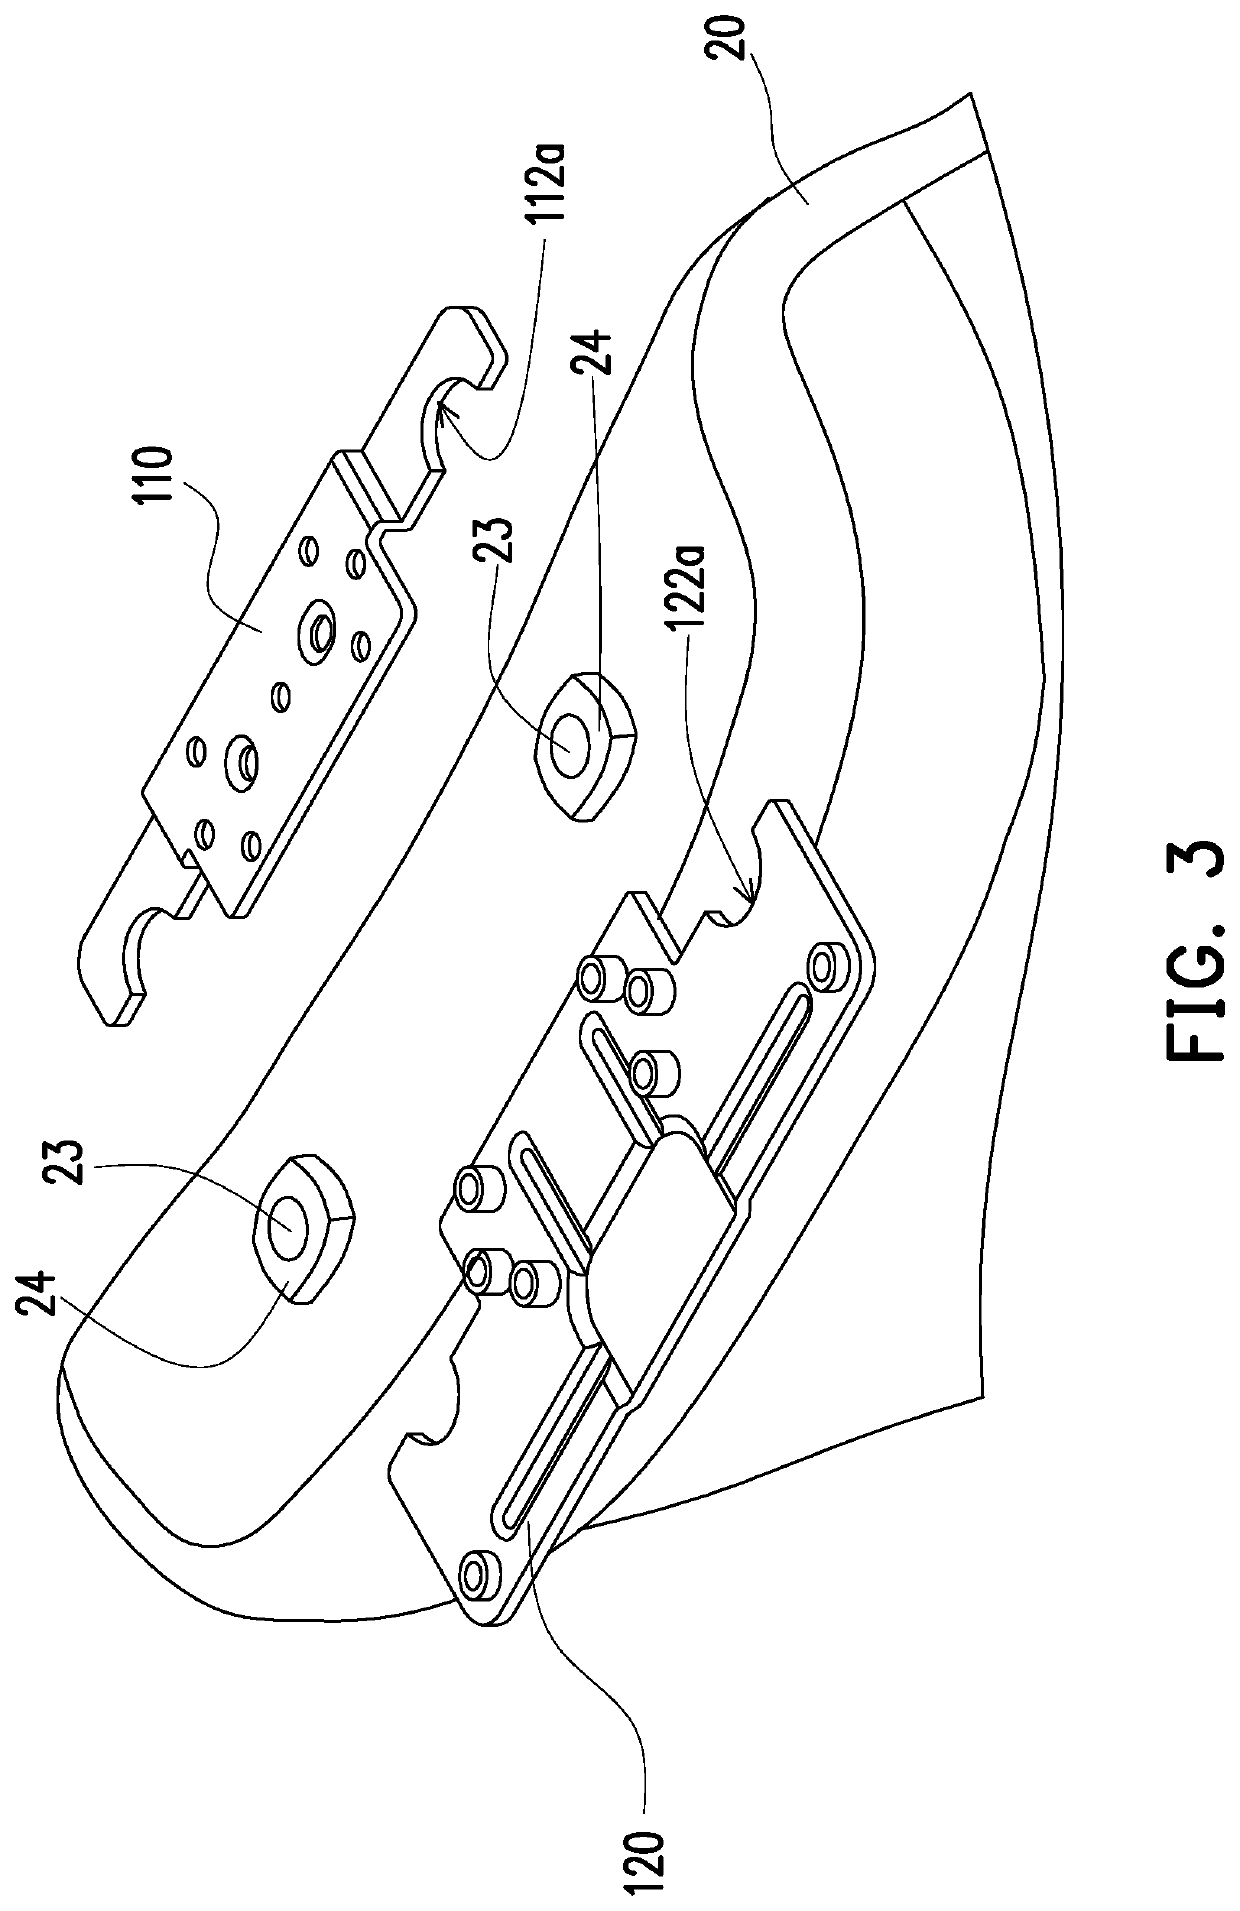 Installing bracket and electronic device assembly